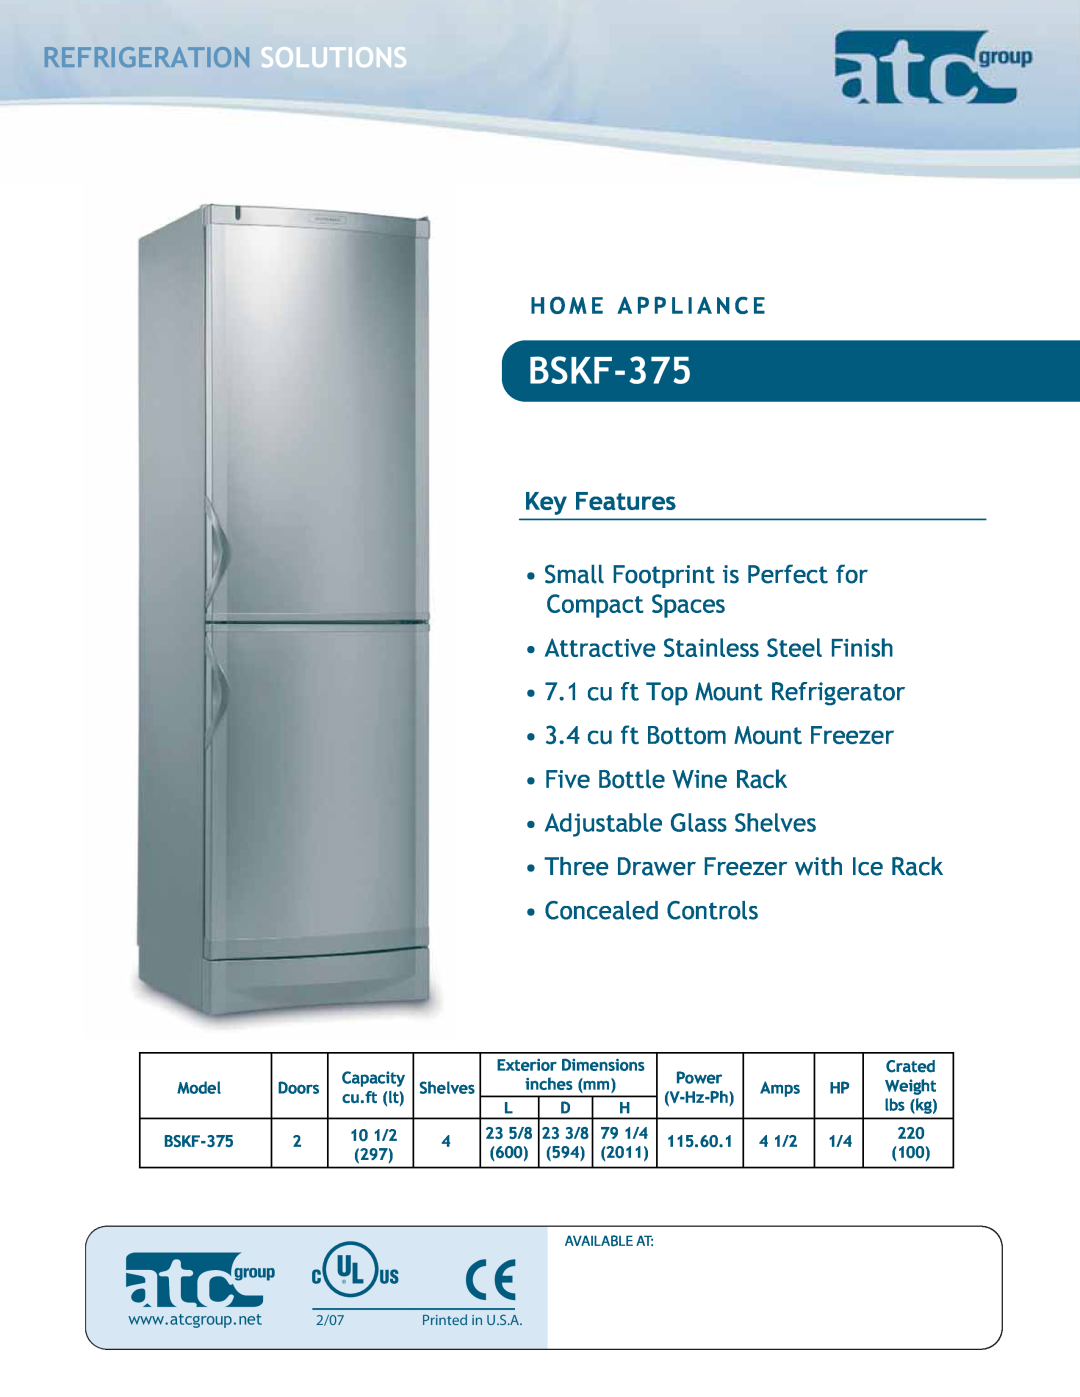 ATC Group BSKF-375 dimensions Refrigeration Solutions, Key Features 